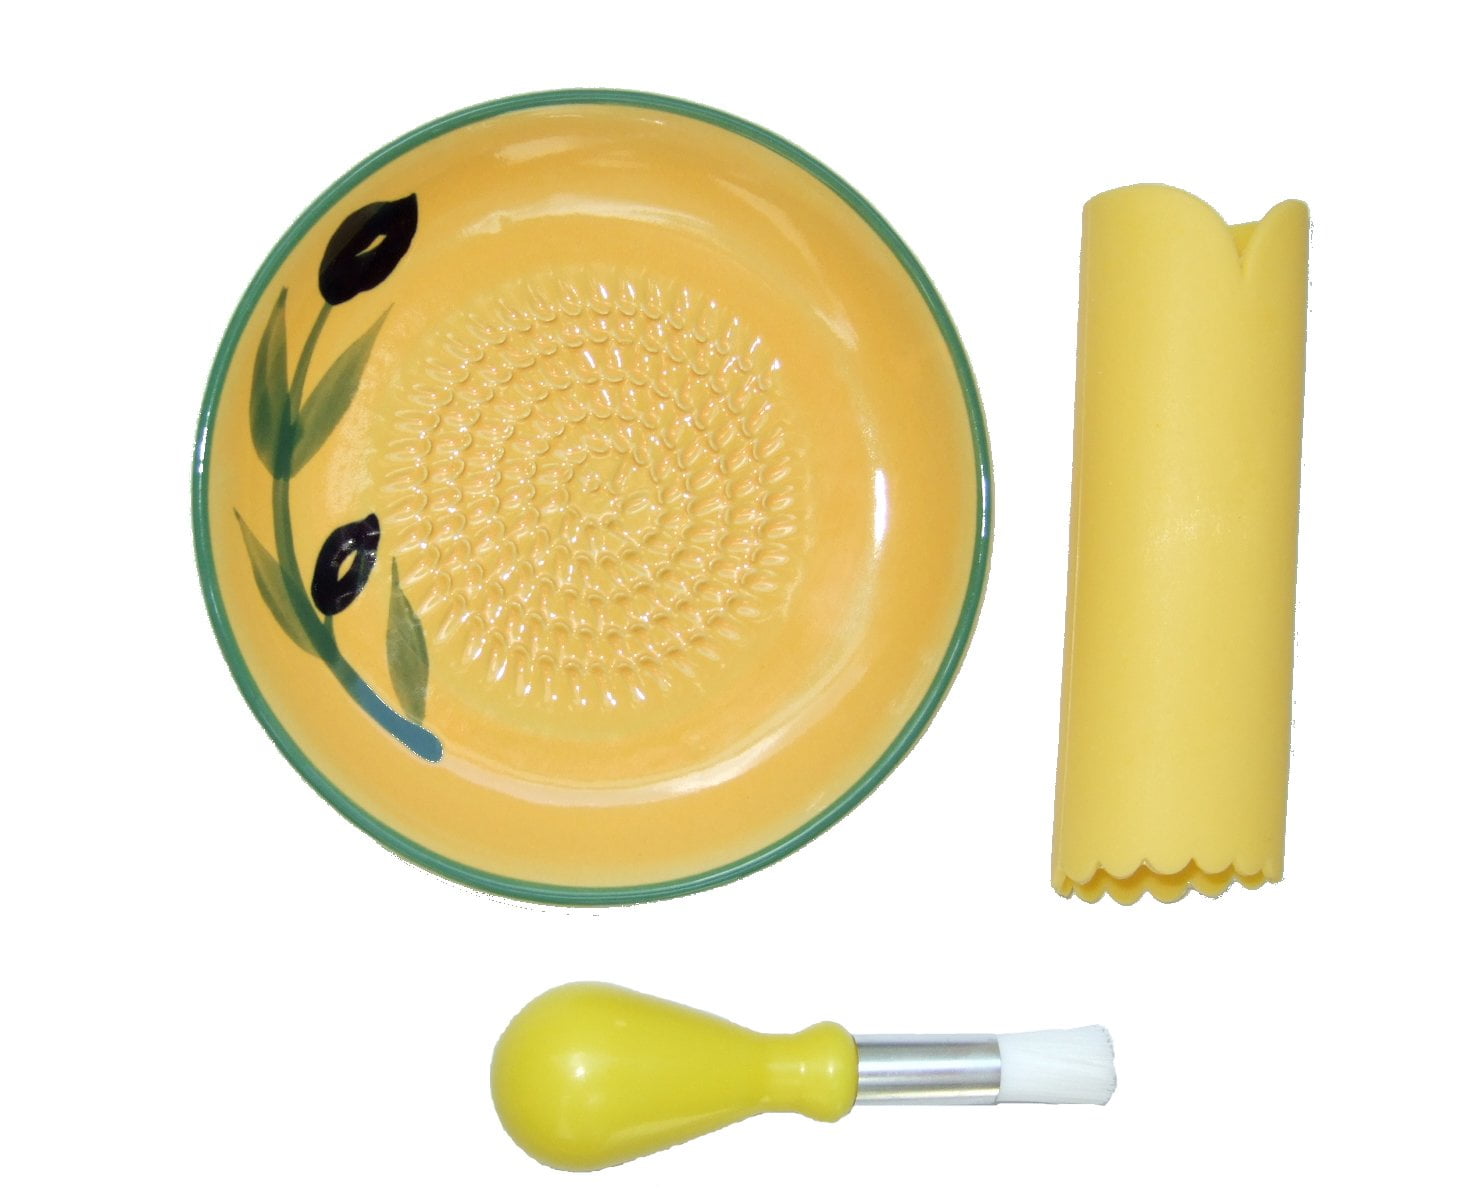 COOKS INNOVATIONS Ceramic Grater Plate 3 Piece Set - Grater, Peeler, &  Brush - Beautiful Olive Design - Yellow & Green 